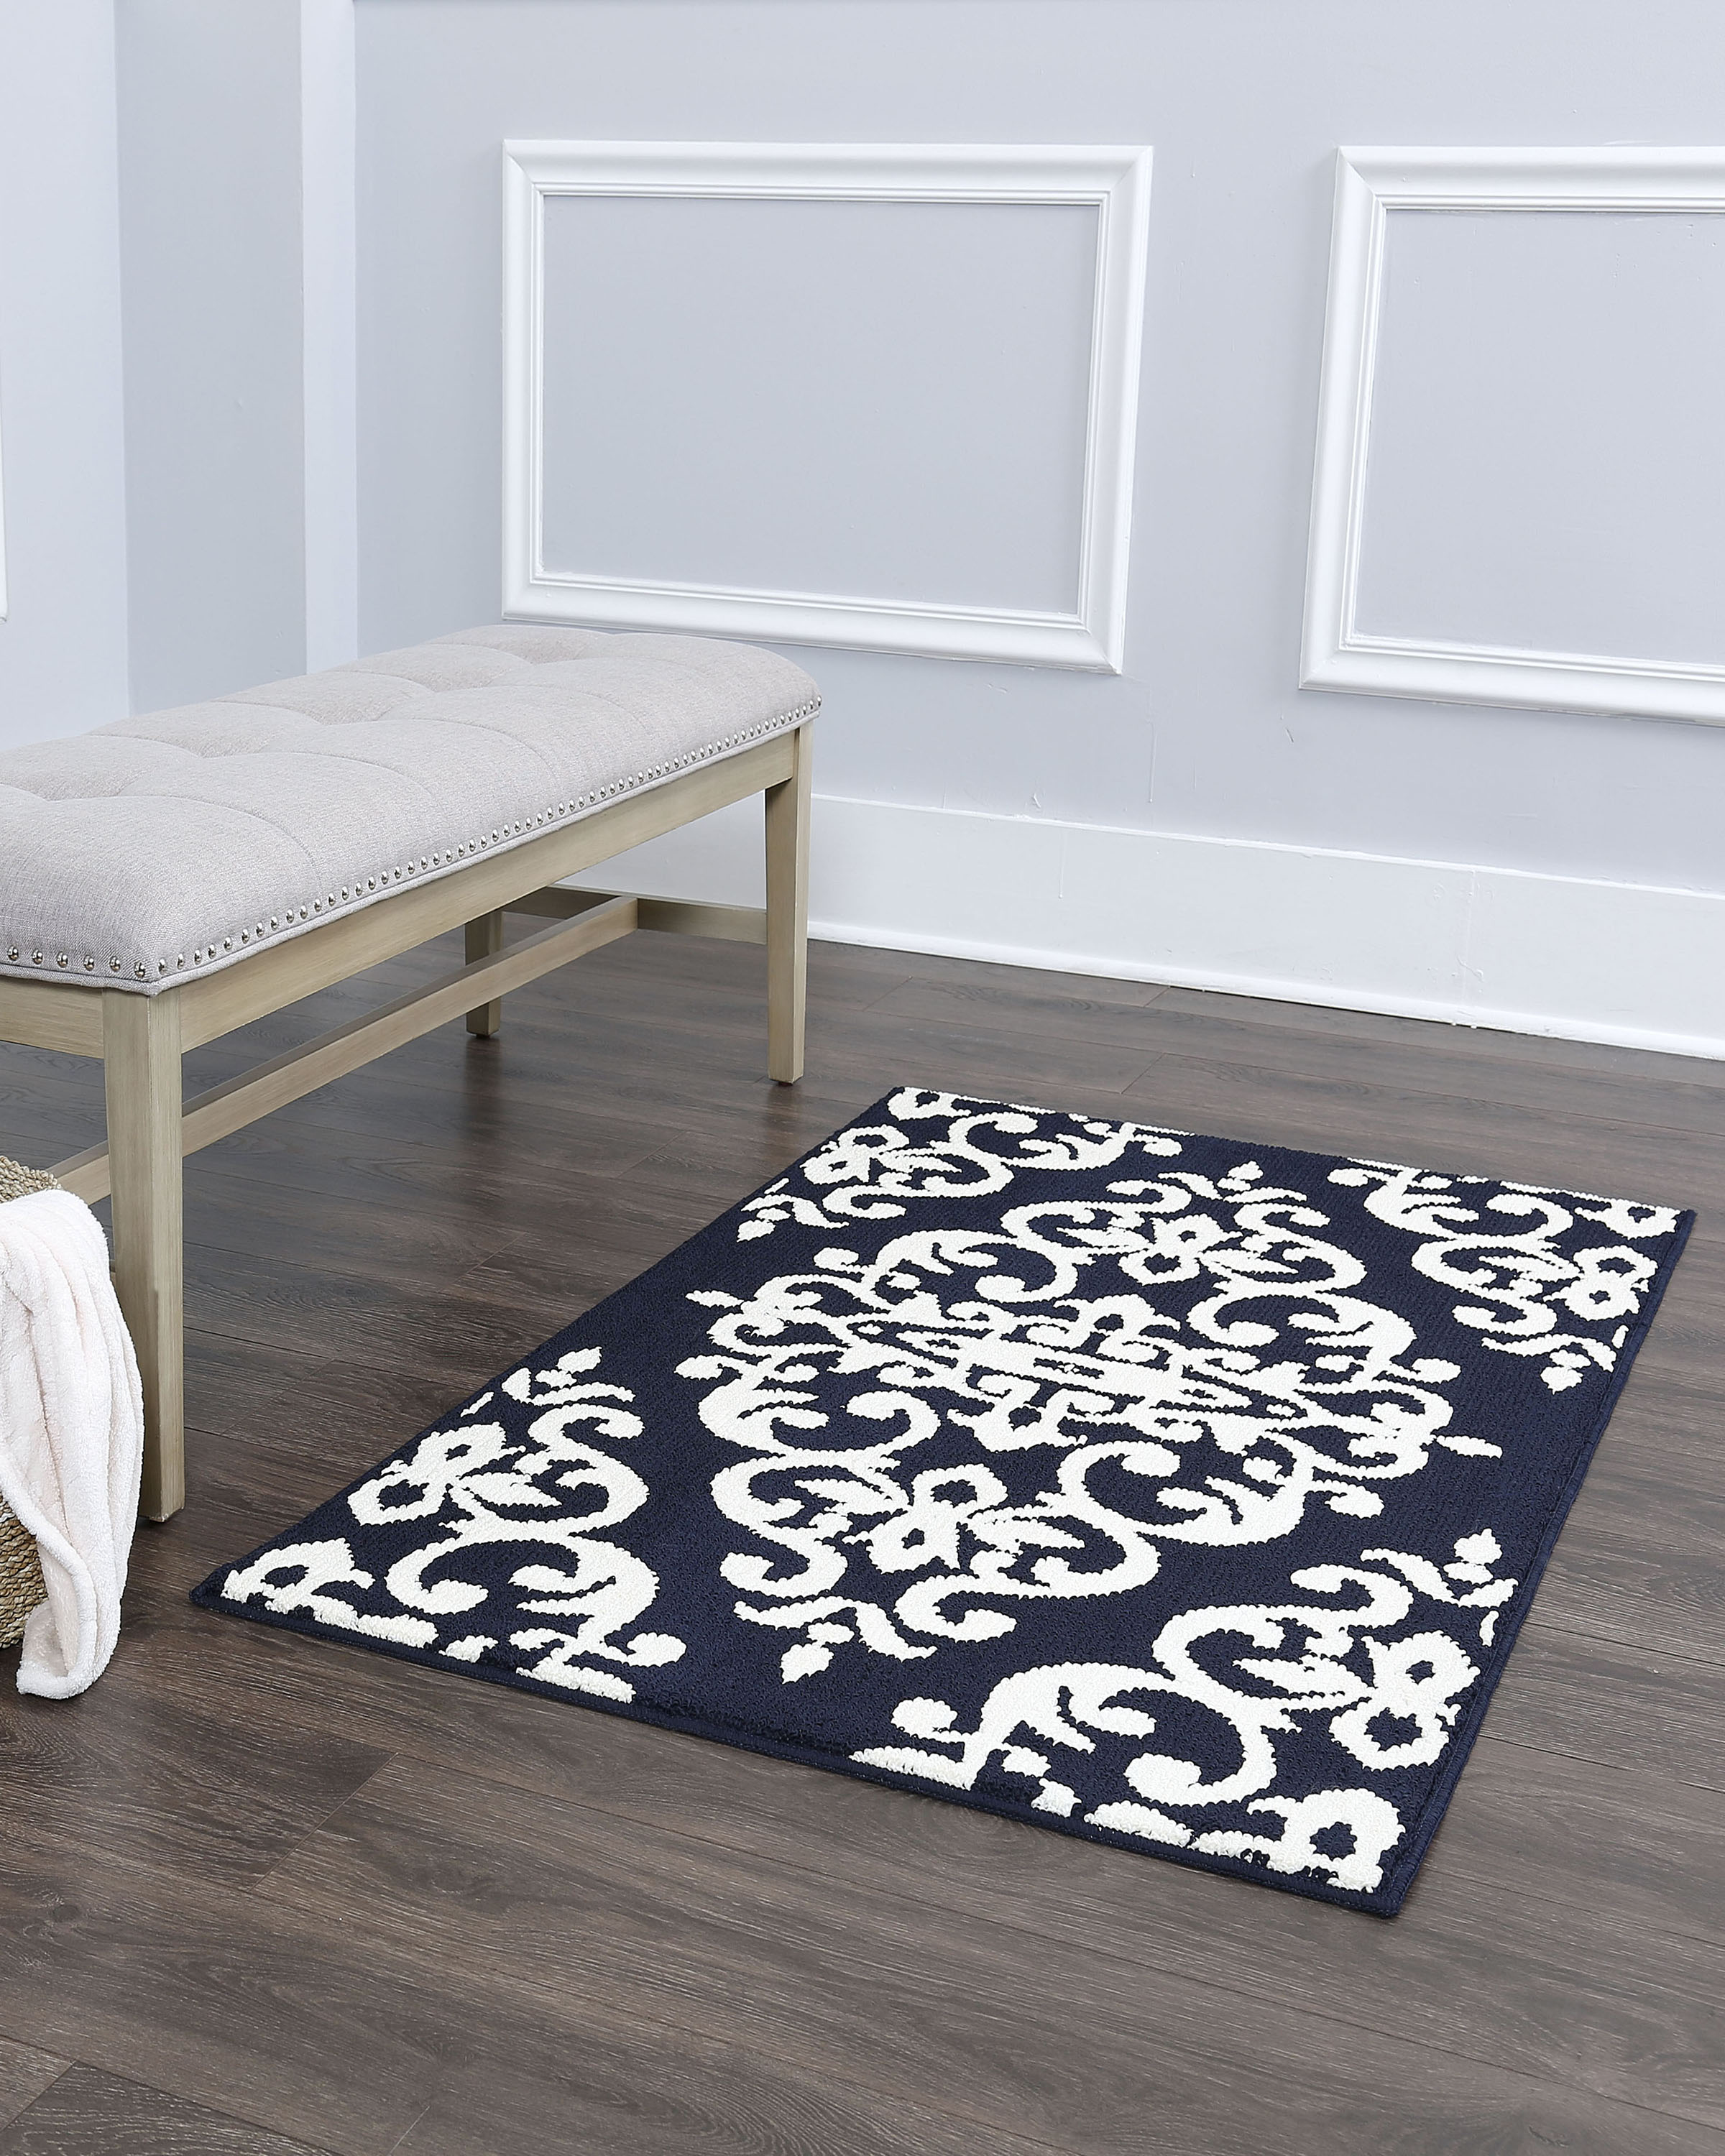 Home Dynamix Oxford Huron Damask Area Rug, Cream/Gray, 5'2"x7'2" - image 2 of 4